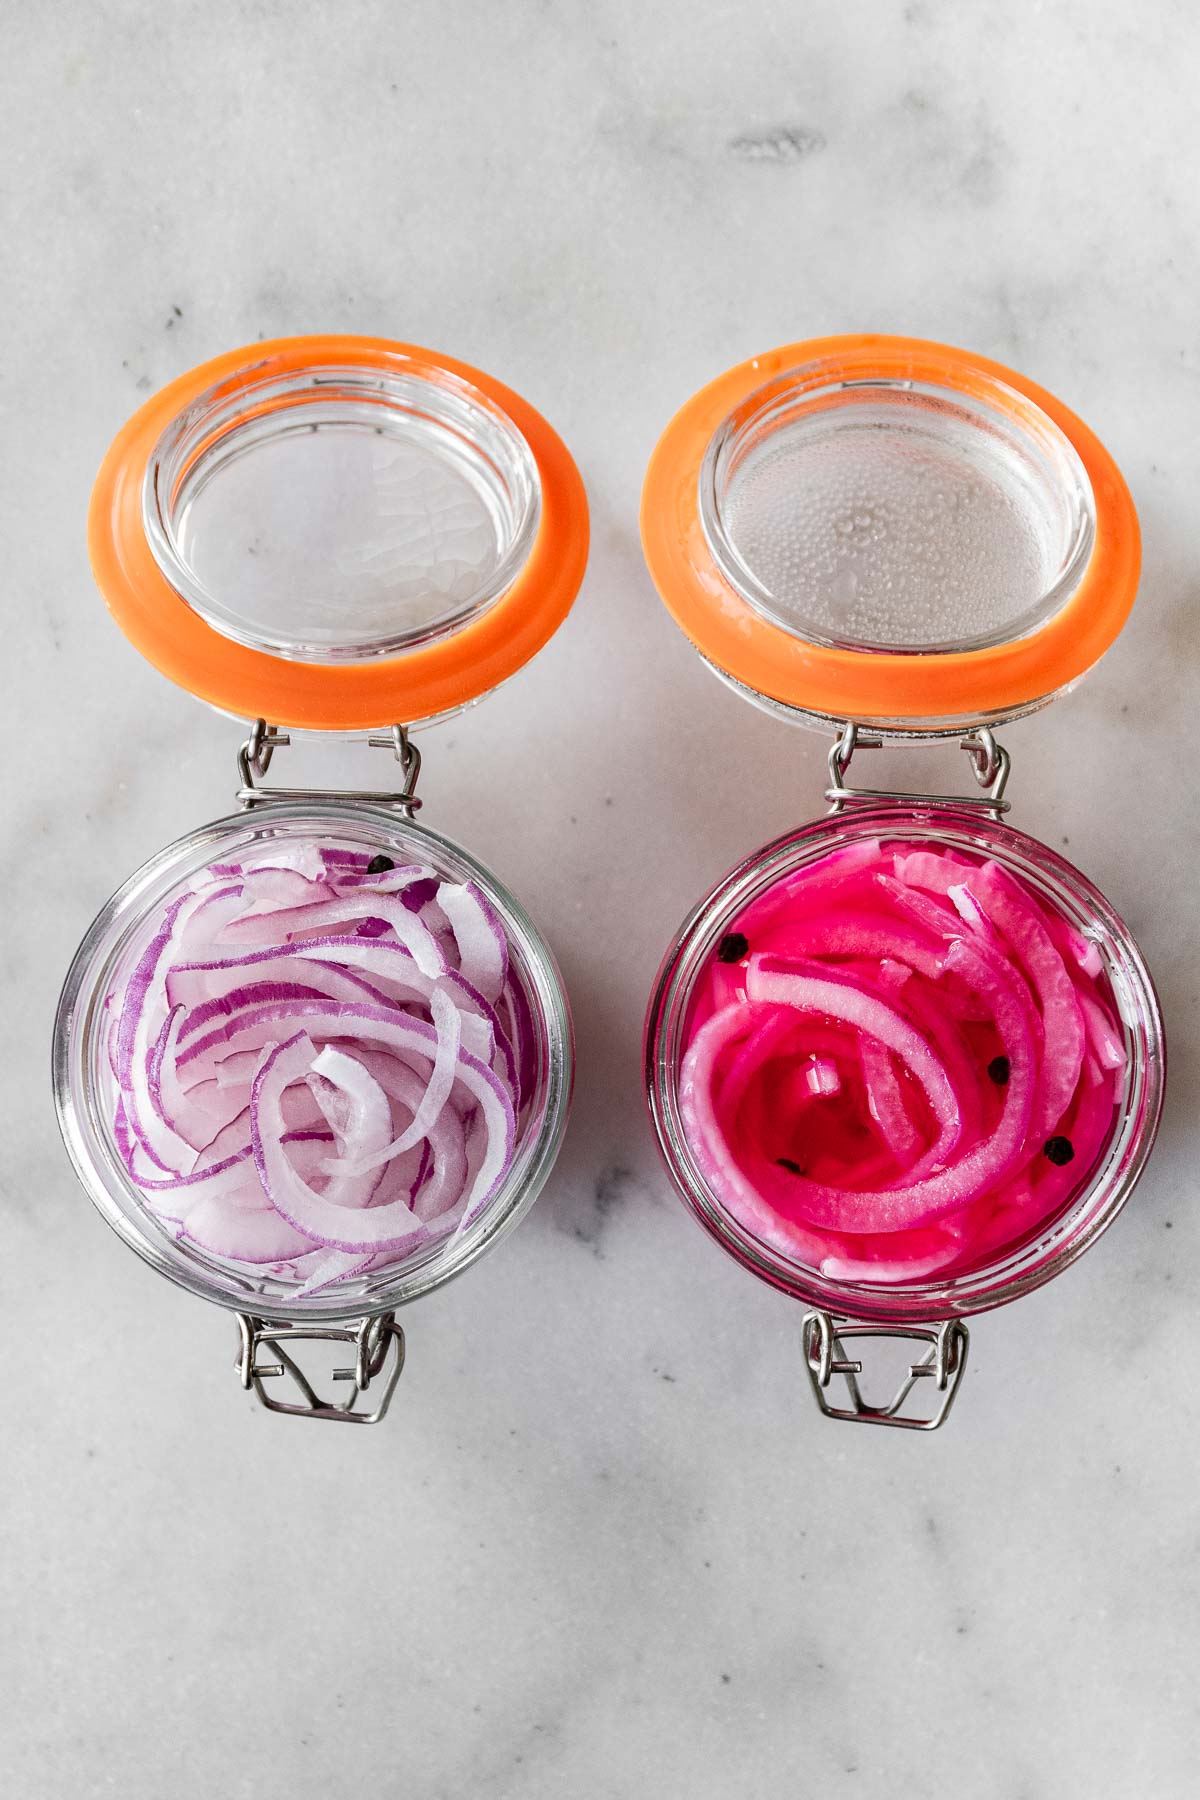 Pickled Red Onions in canning jars before and after pickling